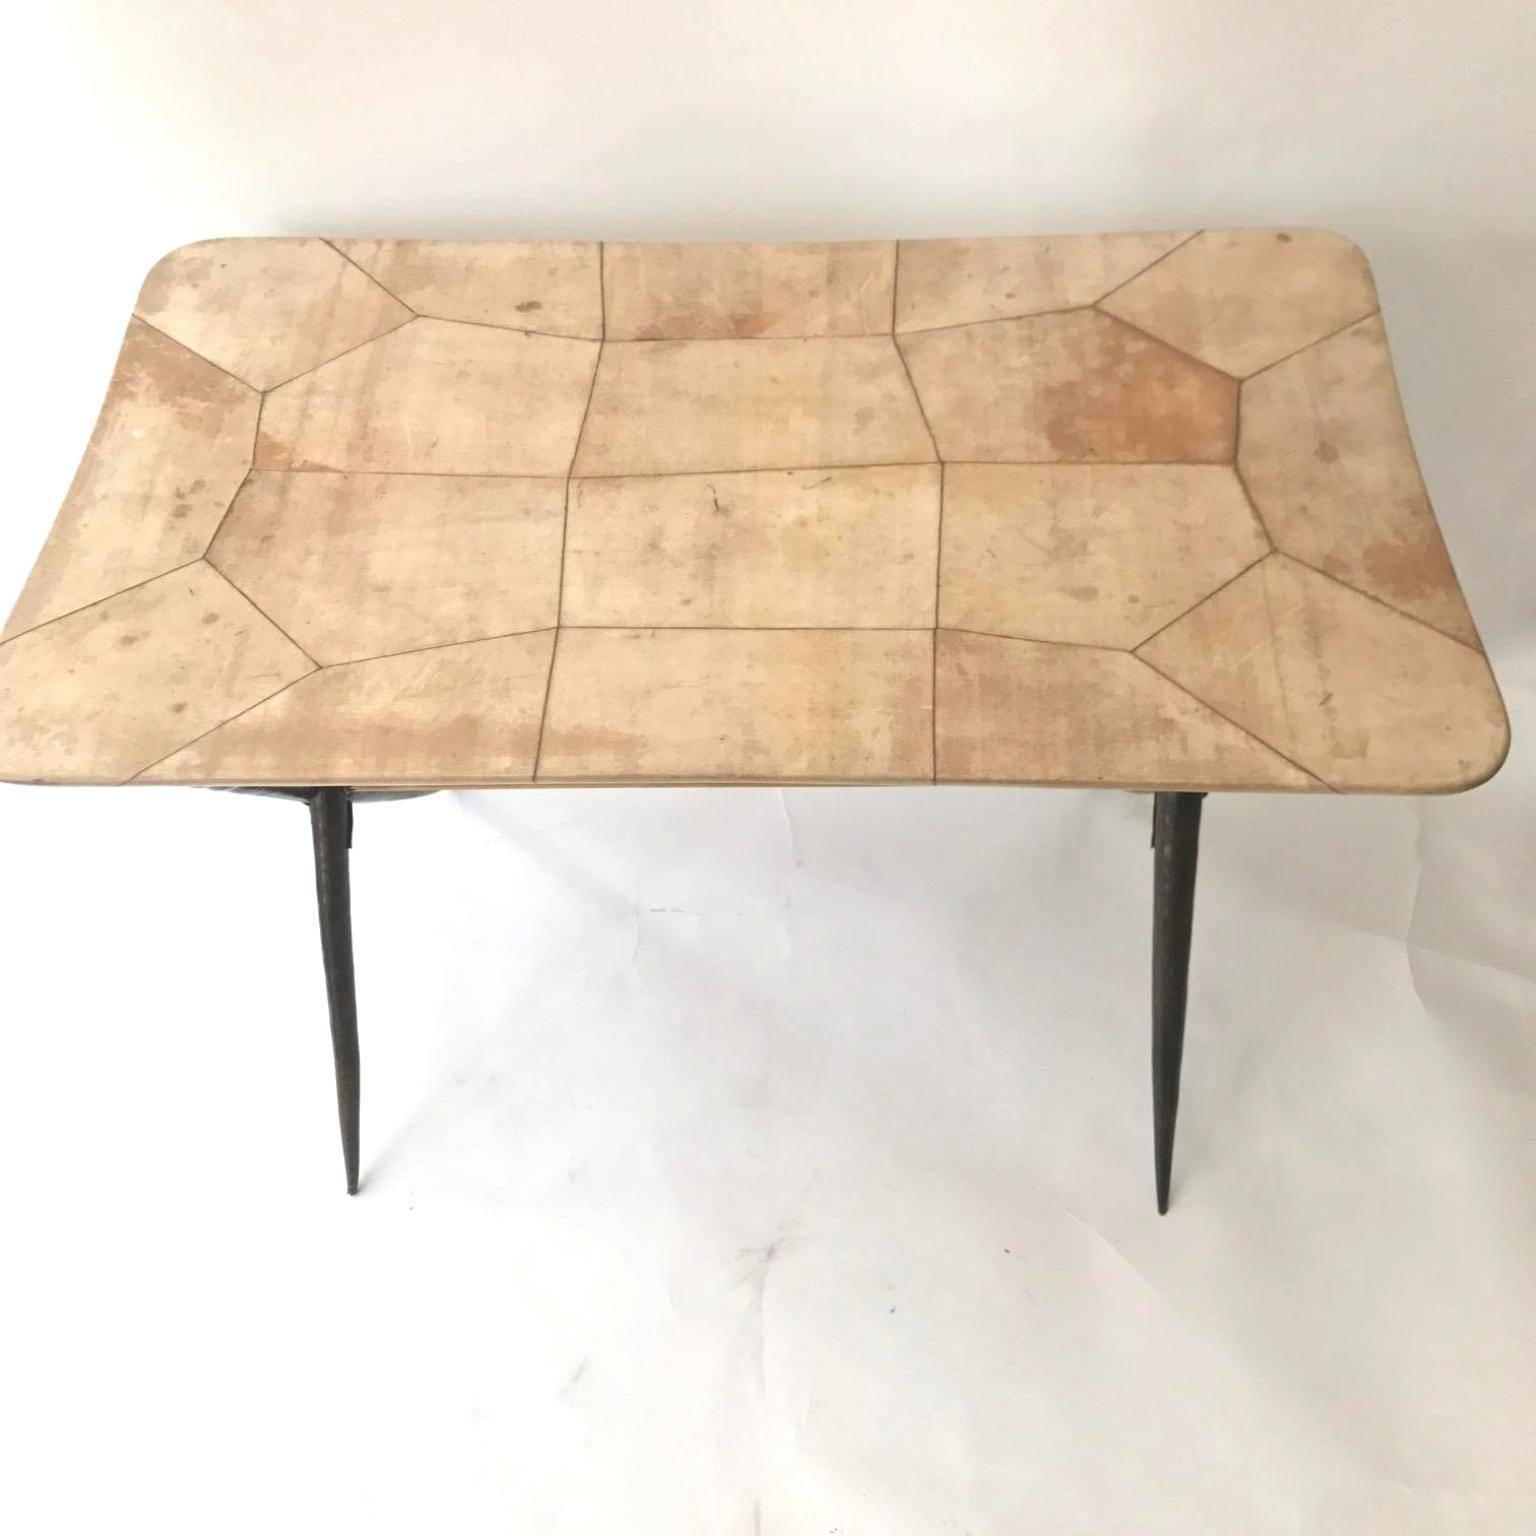 This unusual rare coffee table with parchment top and feet made of Antelope horns supported by brass rod in the middle. Italian, circa 1950s by Aldo Tura.